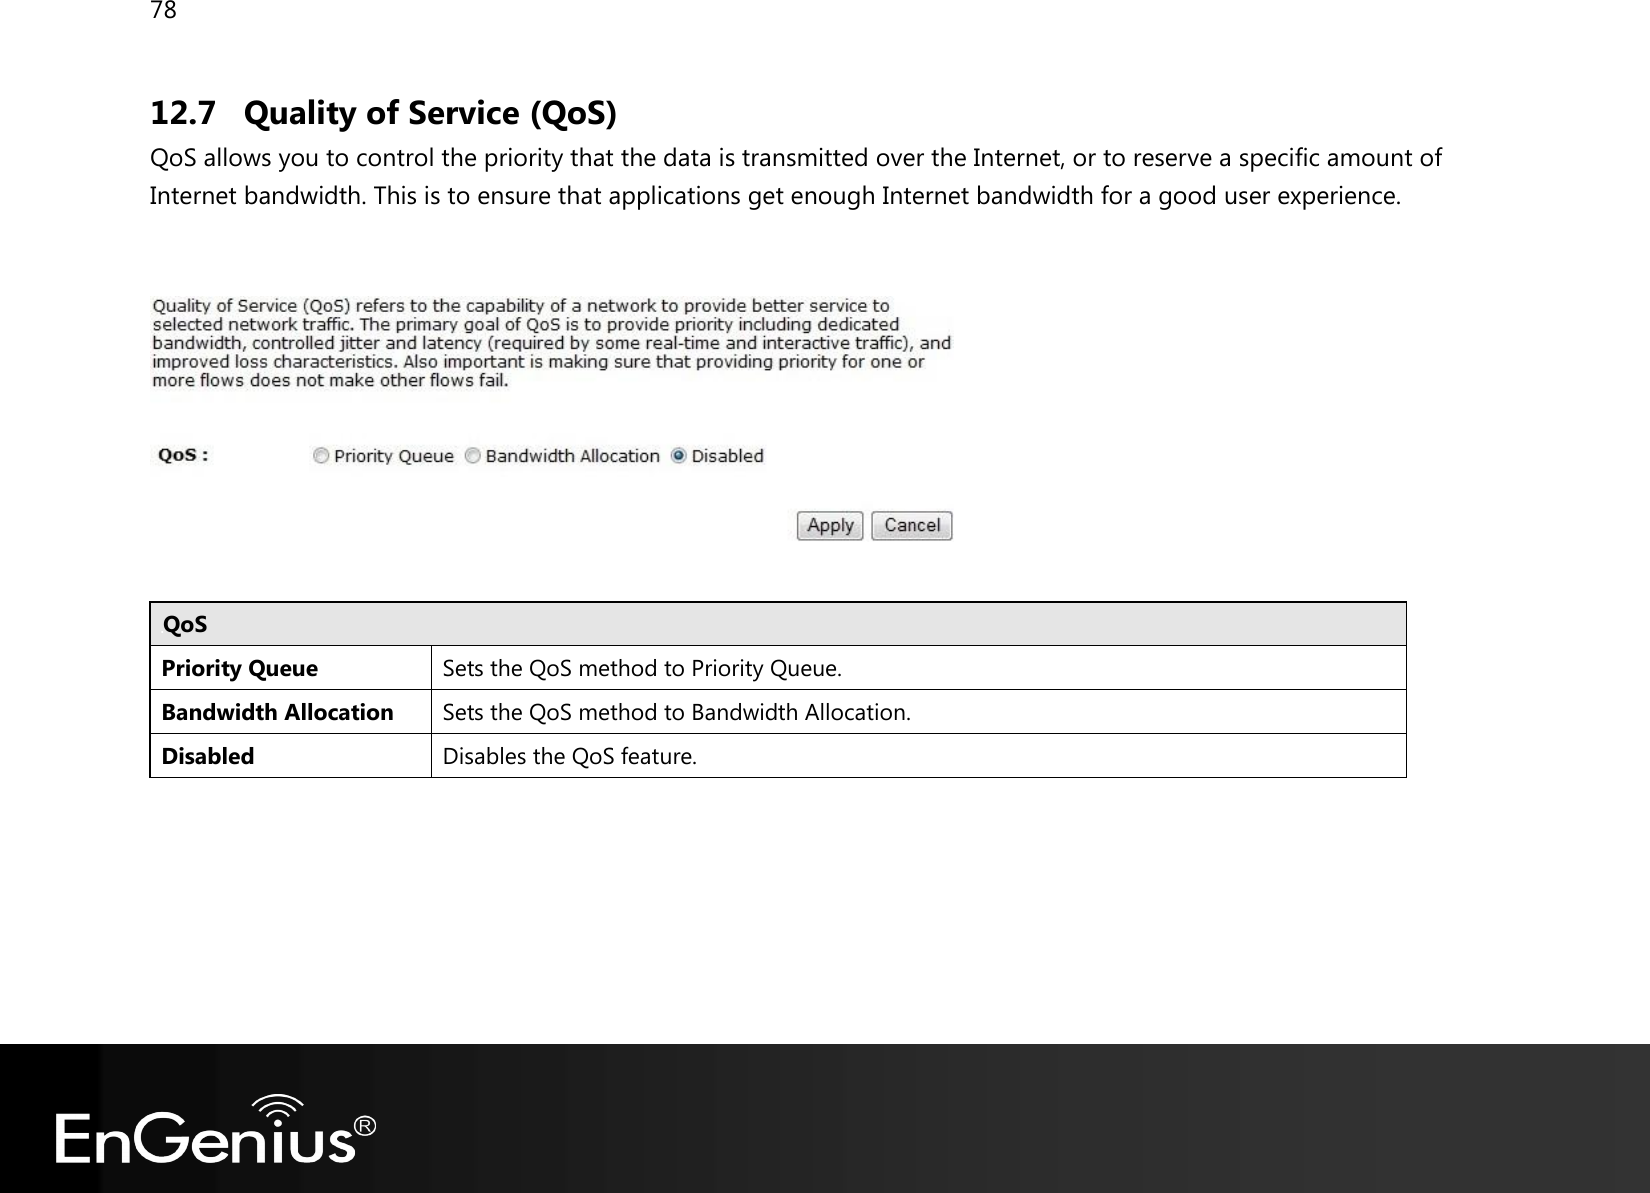 78  12.7 Quality of Service (QoS) QoS allows you to control the priority that the data is transmitted over the Internet, or to reserve a specific amount of Internet bandwidth. This is to ensure that applications get enough Internet bandwidth for a good user experience.    QoS Priority Queue Sets the QoS method to Priority Queue. Bandwidth Allocation Sets the QoS method to Bandwidth Allocation. Disabled Disables the QoS feature.     